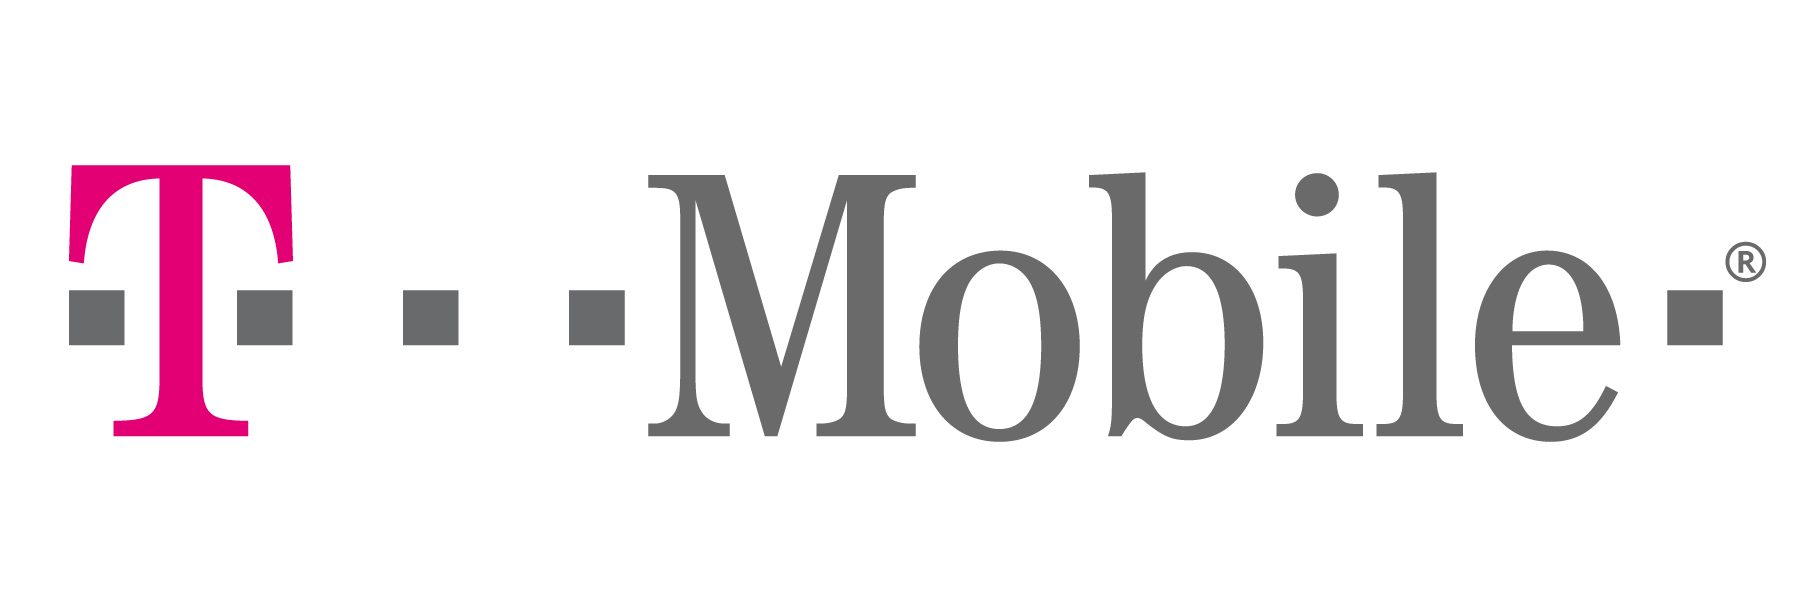 Find the best T-Mobile Cell Phone Plans on Gadget News Online.